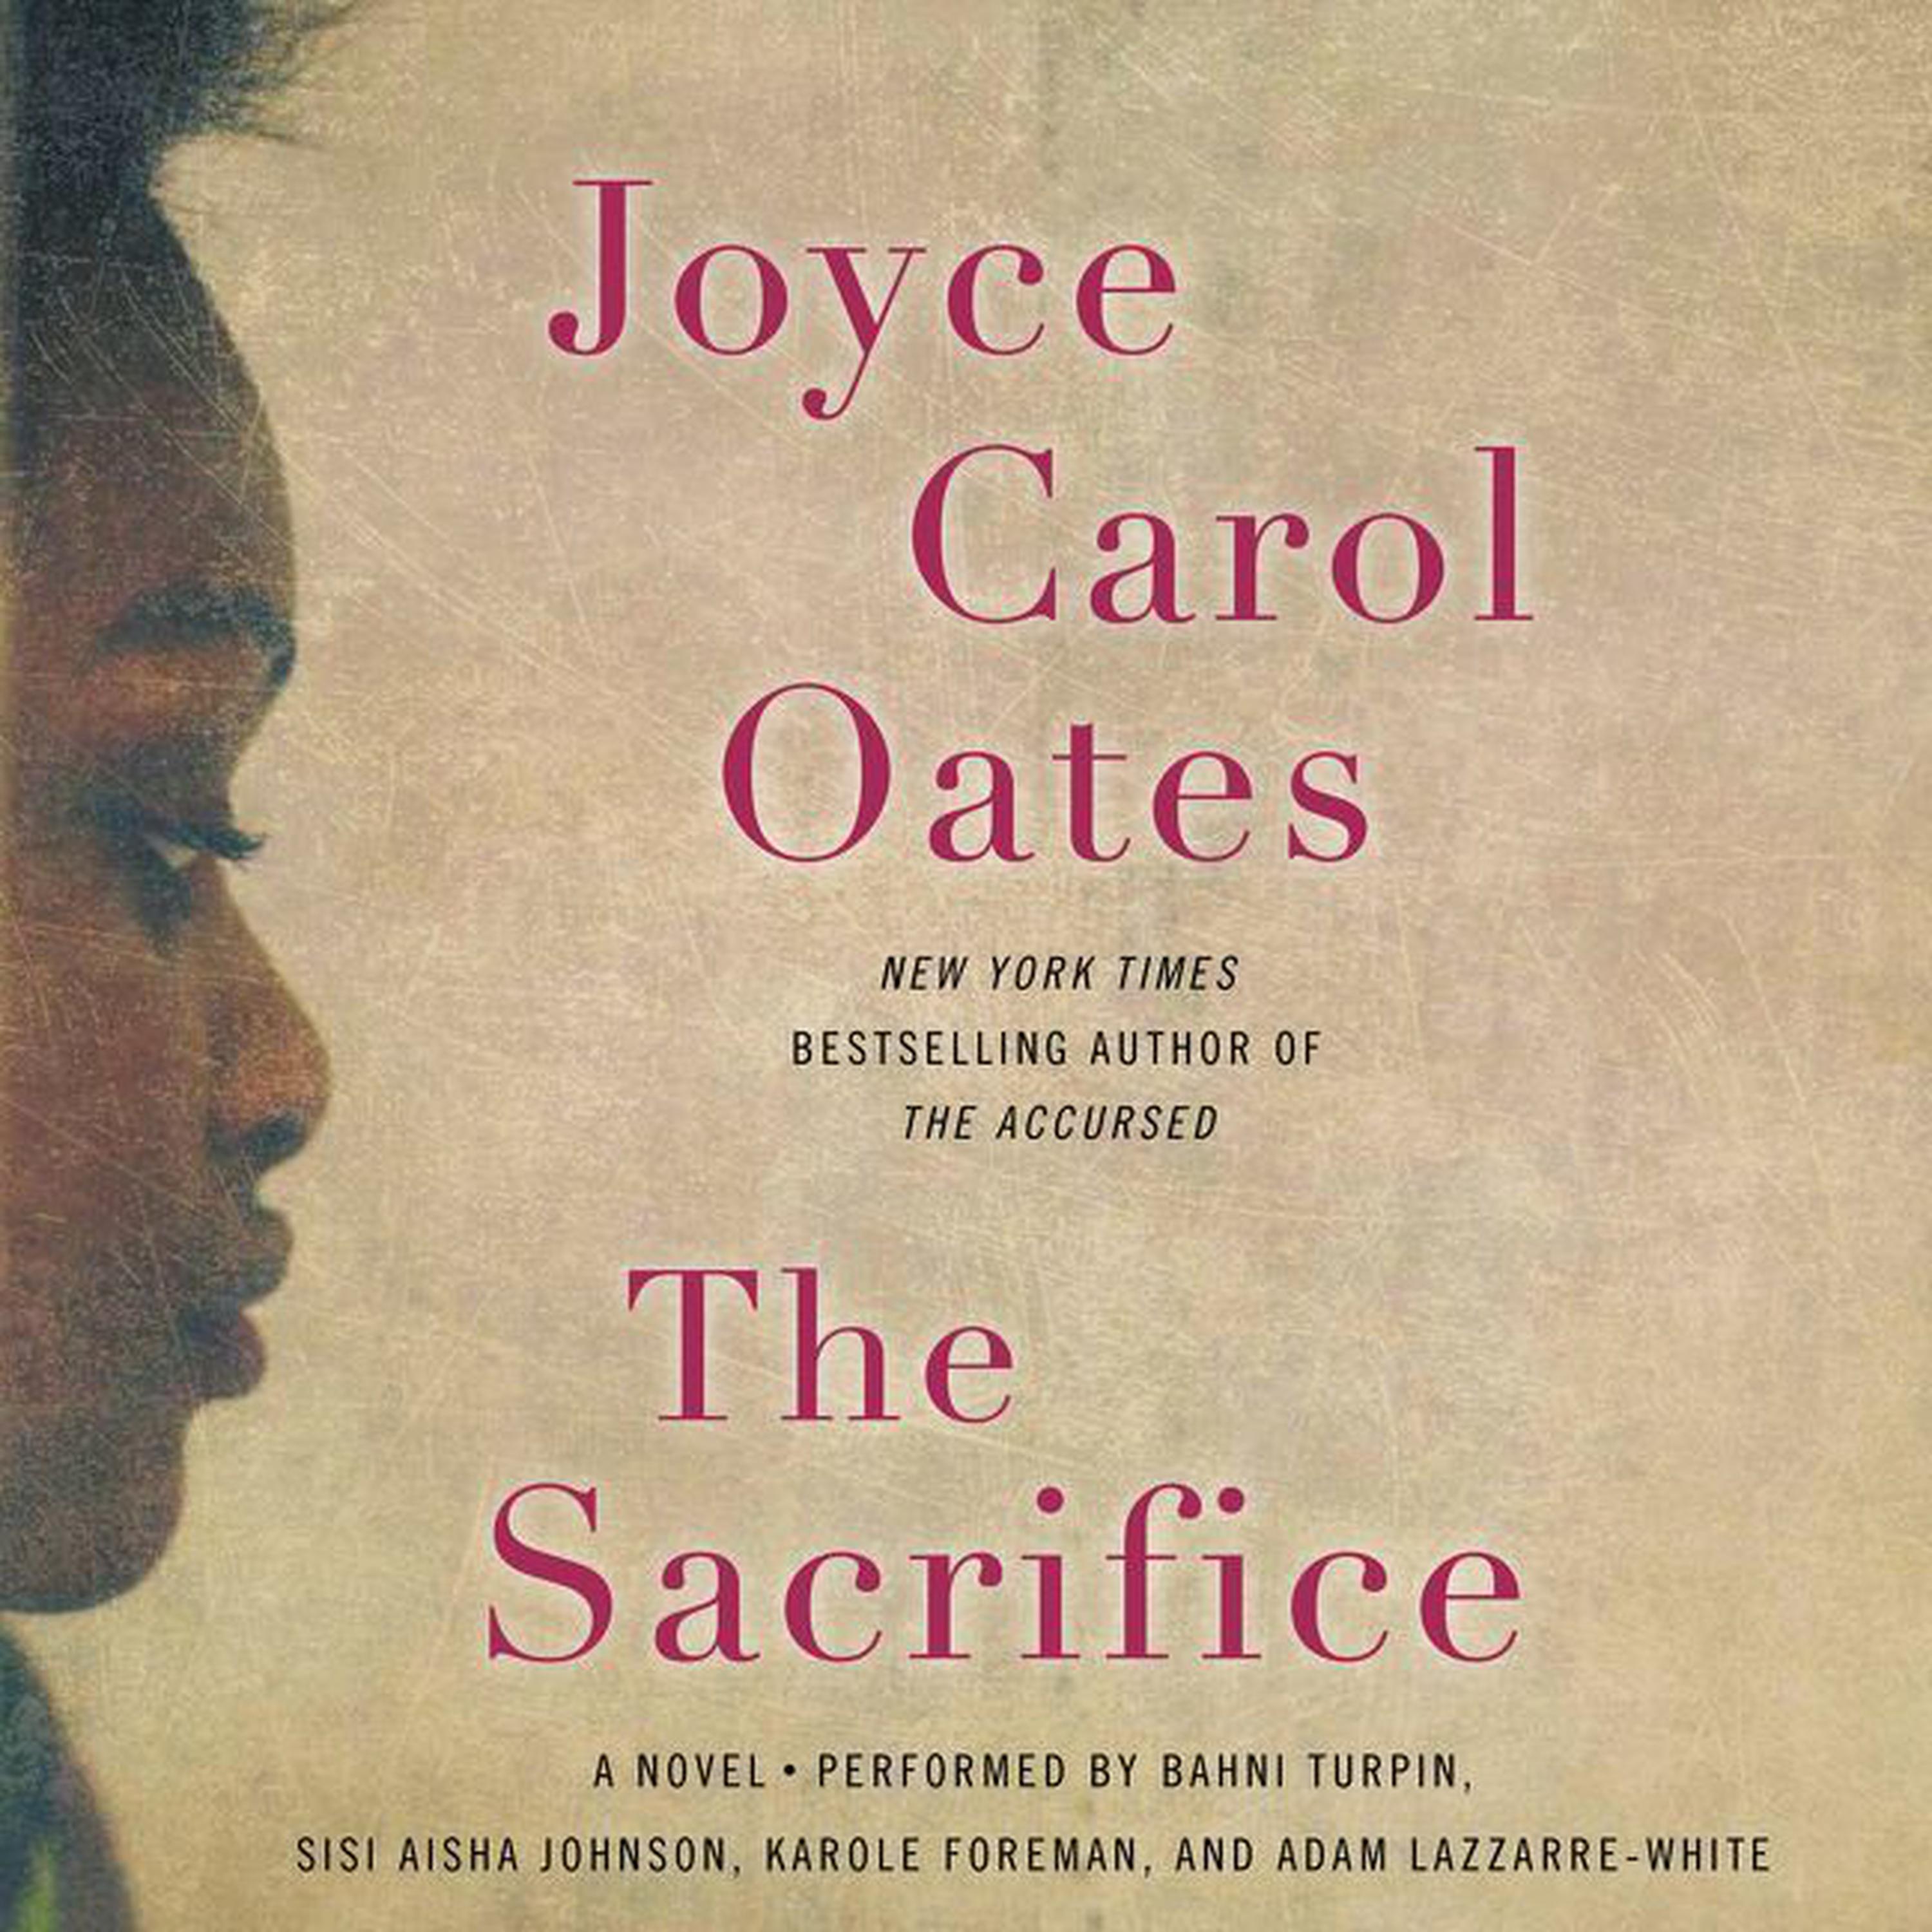 Download The Accursed By Joyce Carol Oates